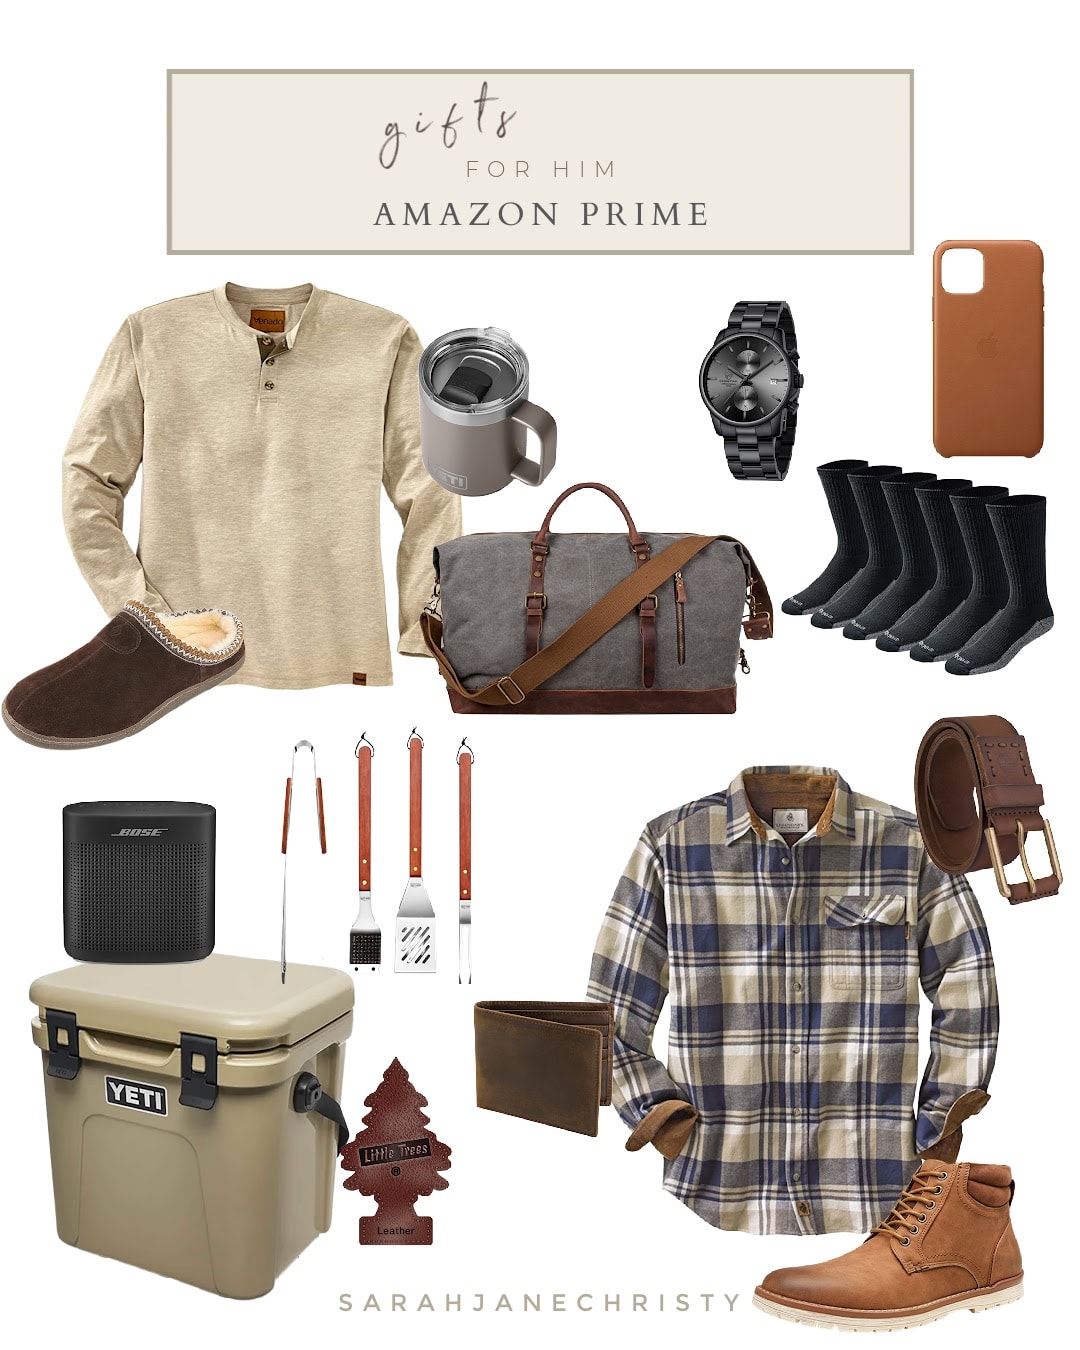 mens gift ideas from amazon prime christmas gift guide